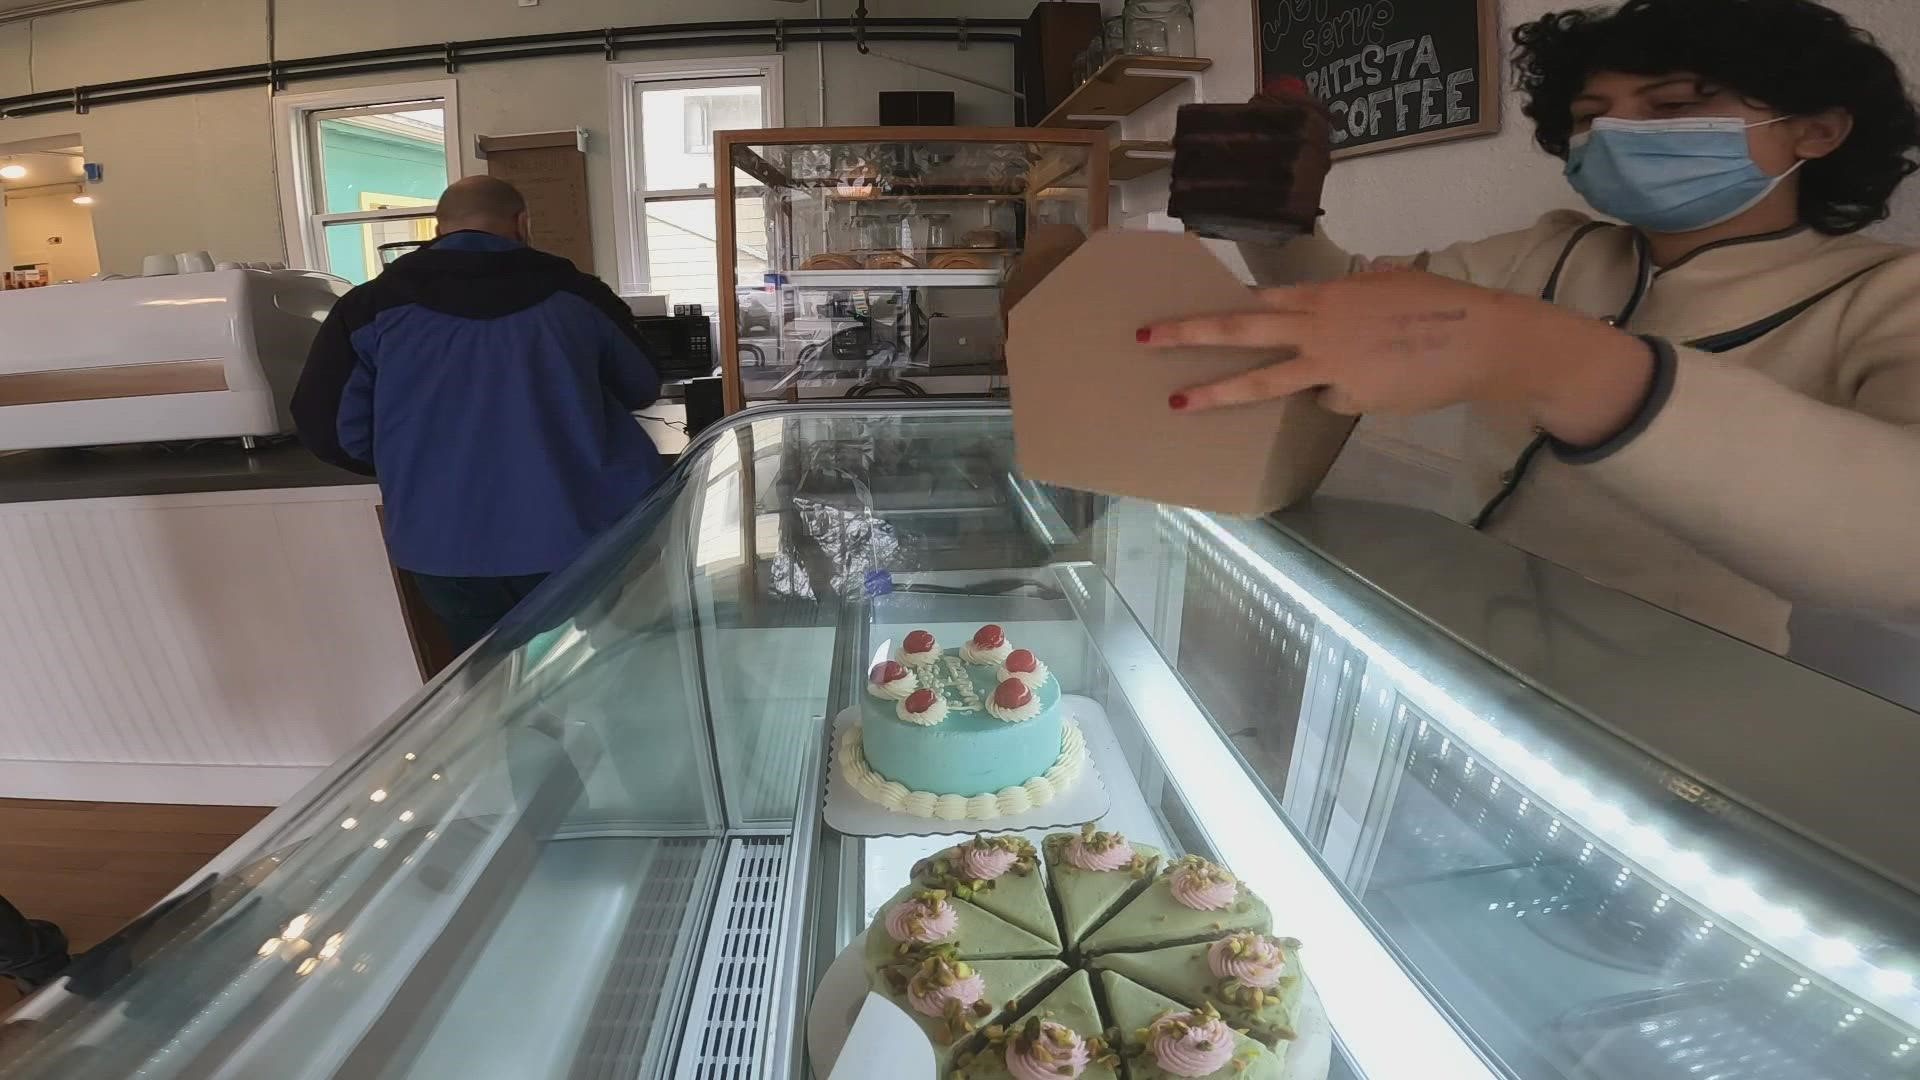 Lara de la Rosa, the owner of Lazy Cow Bakery, wants the community to help decide what causes profits from the bakery go toward.